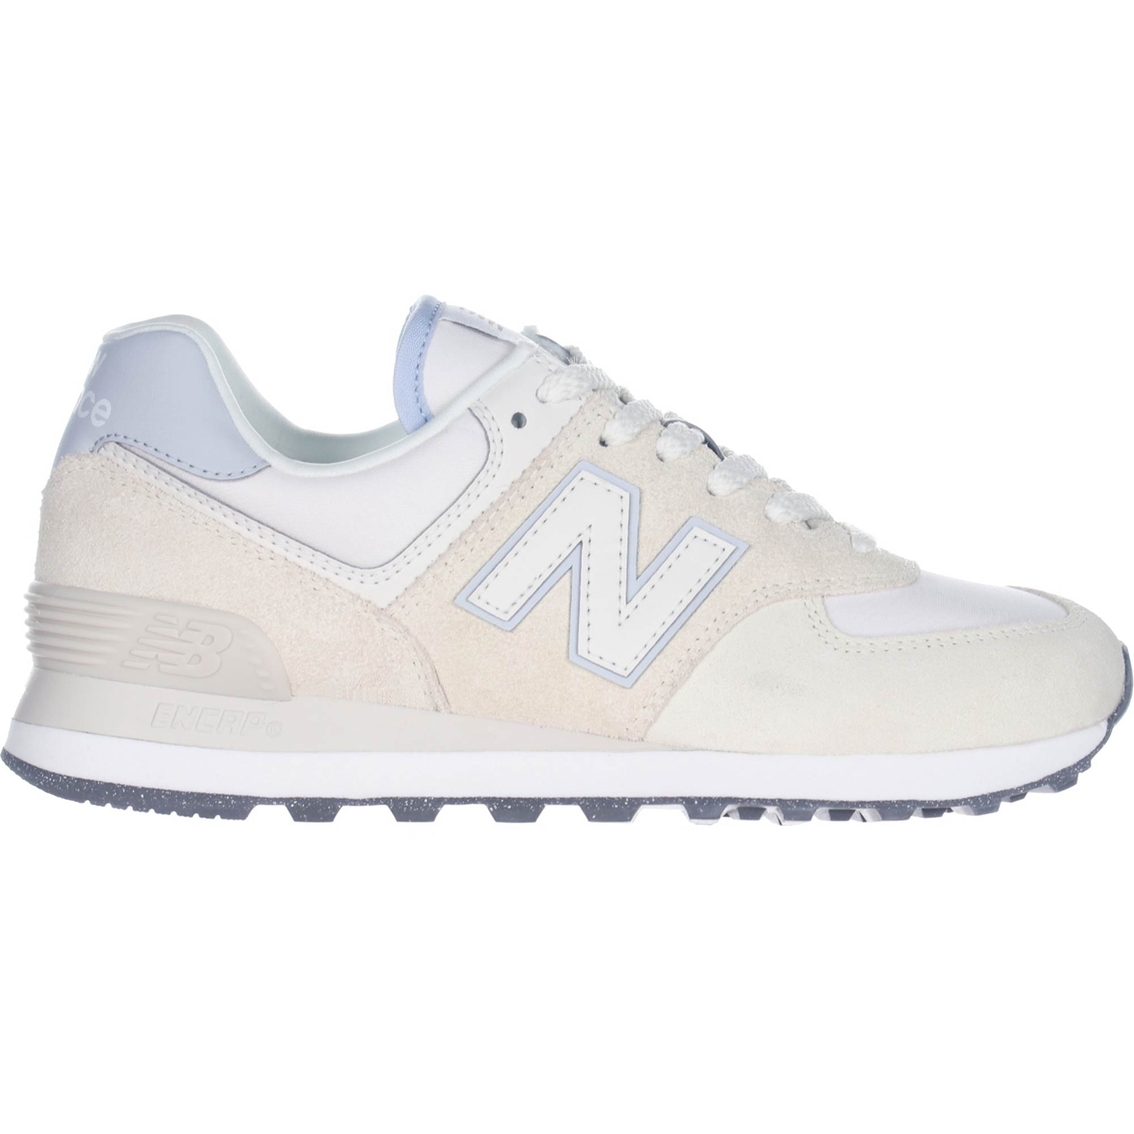 New Balance Women's 574 Sneakers - Image 2 of 3